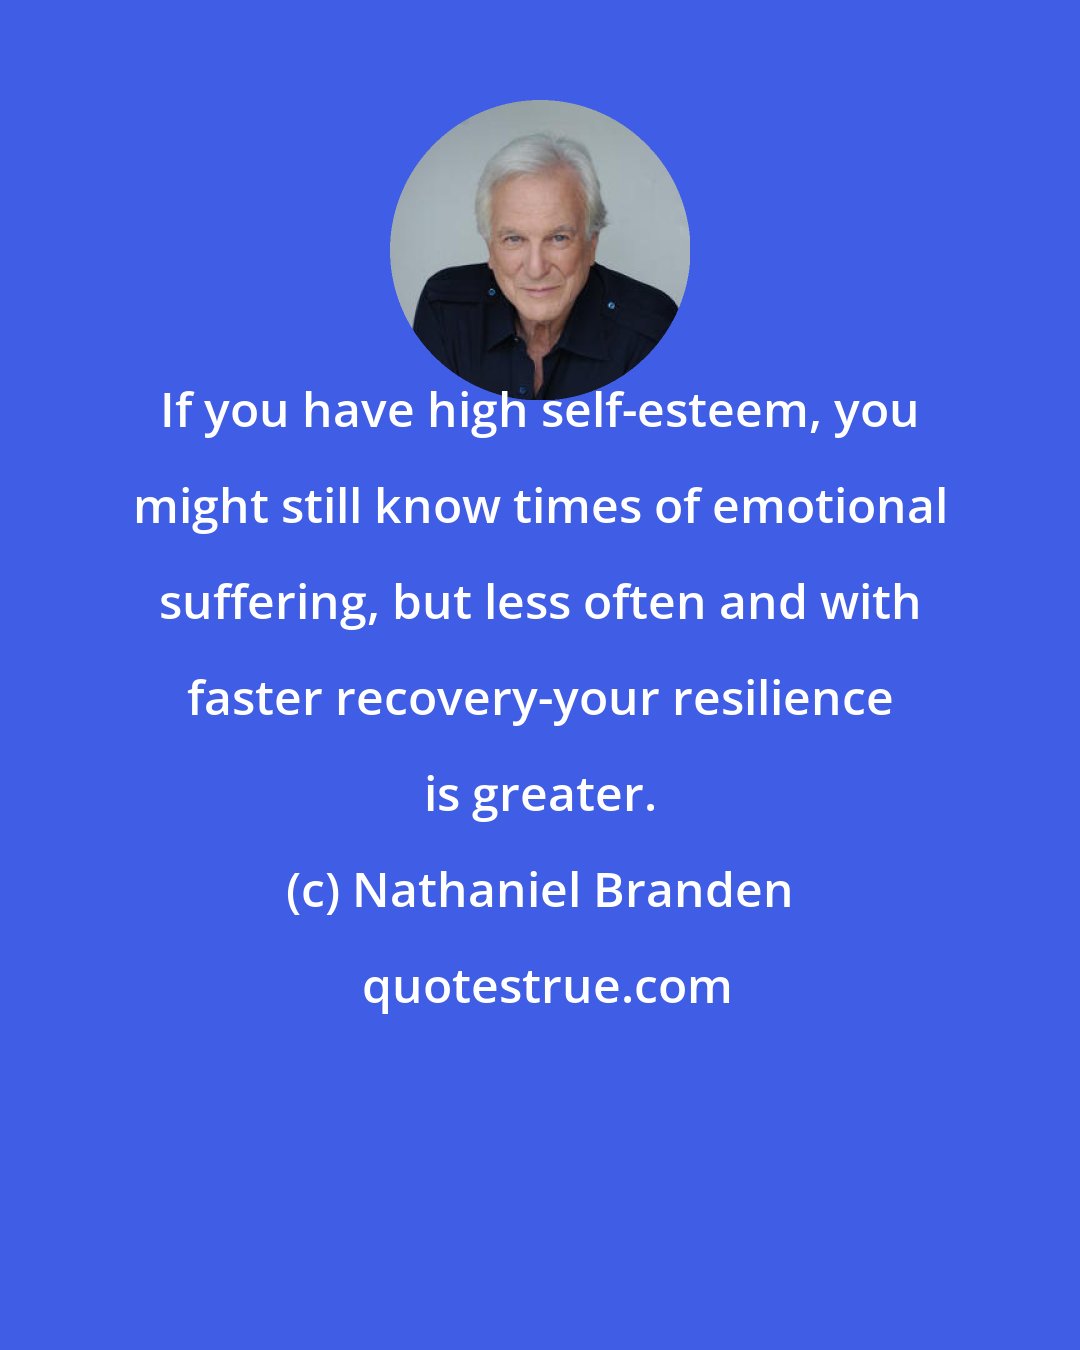 Nathaniel Branden: If you have high self-esteem, you might still know times of emotional suffering, but less often and with faster recovery-your resilience is greater.